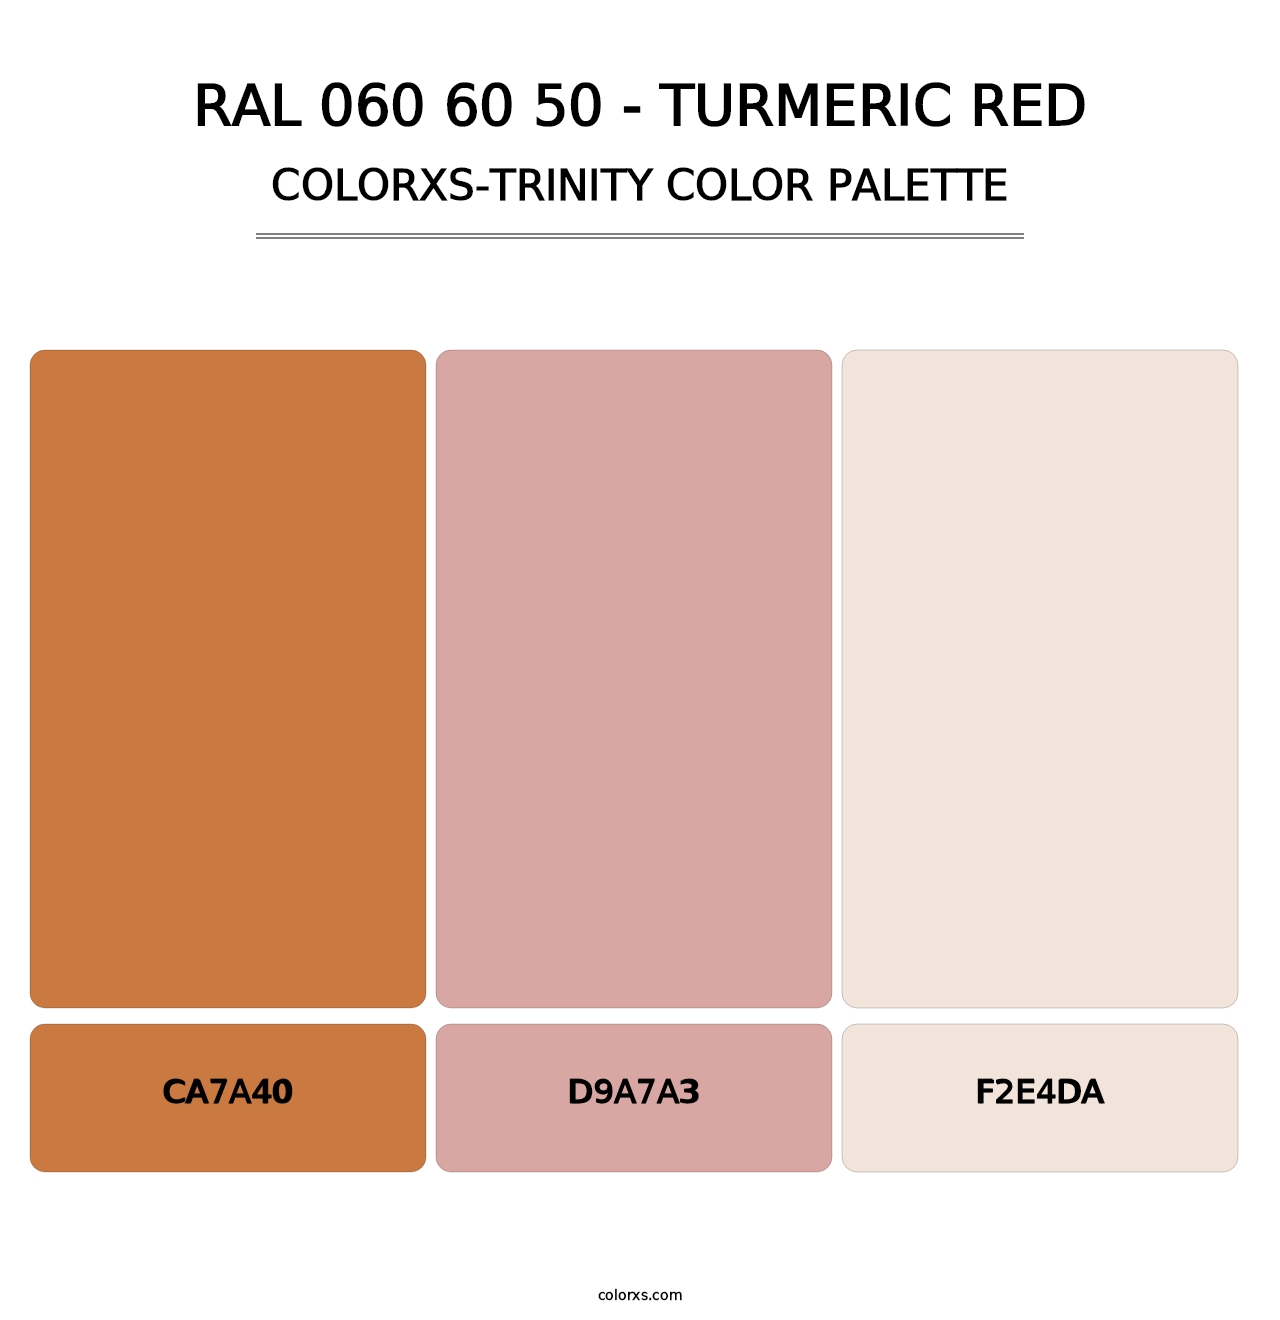 RAL 060 60 50 - Turmeric Red - Colorxs Trinity Palette